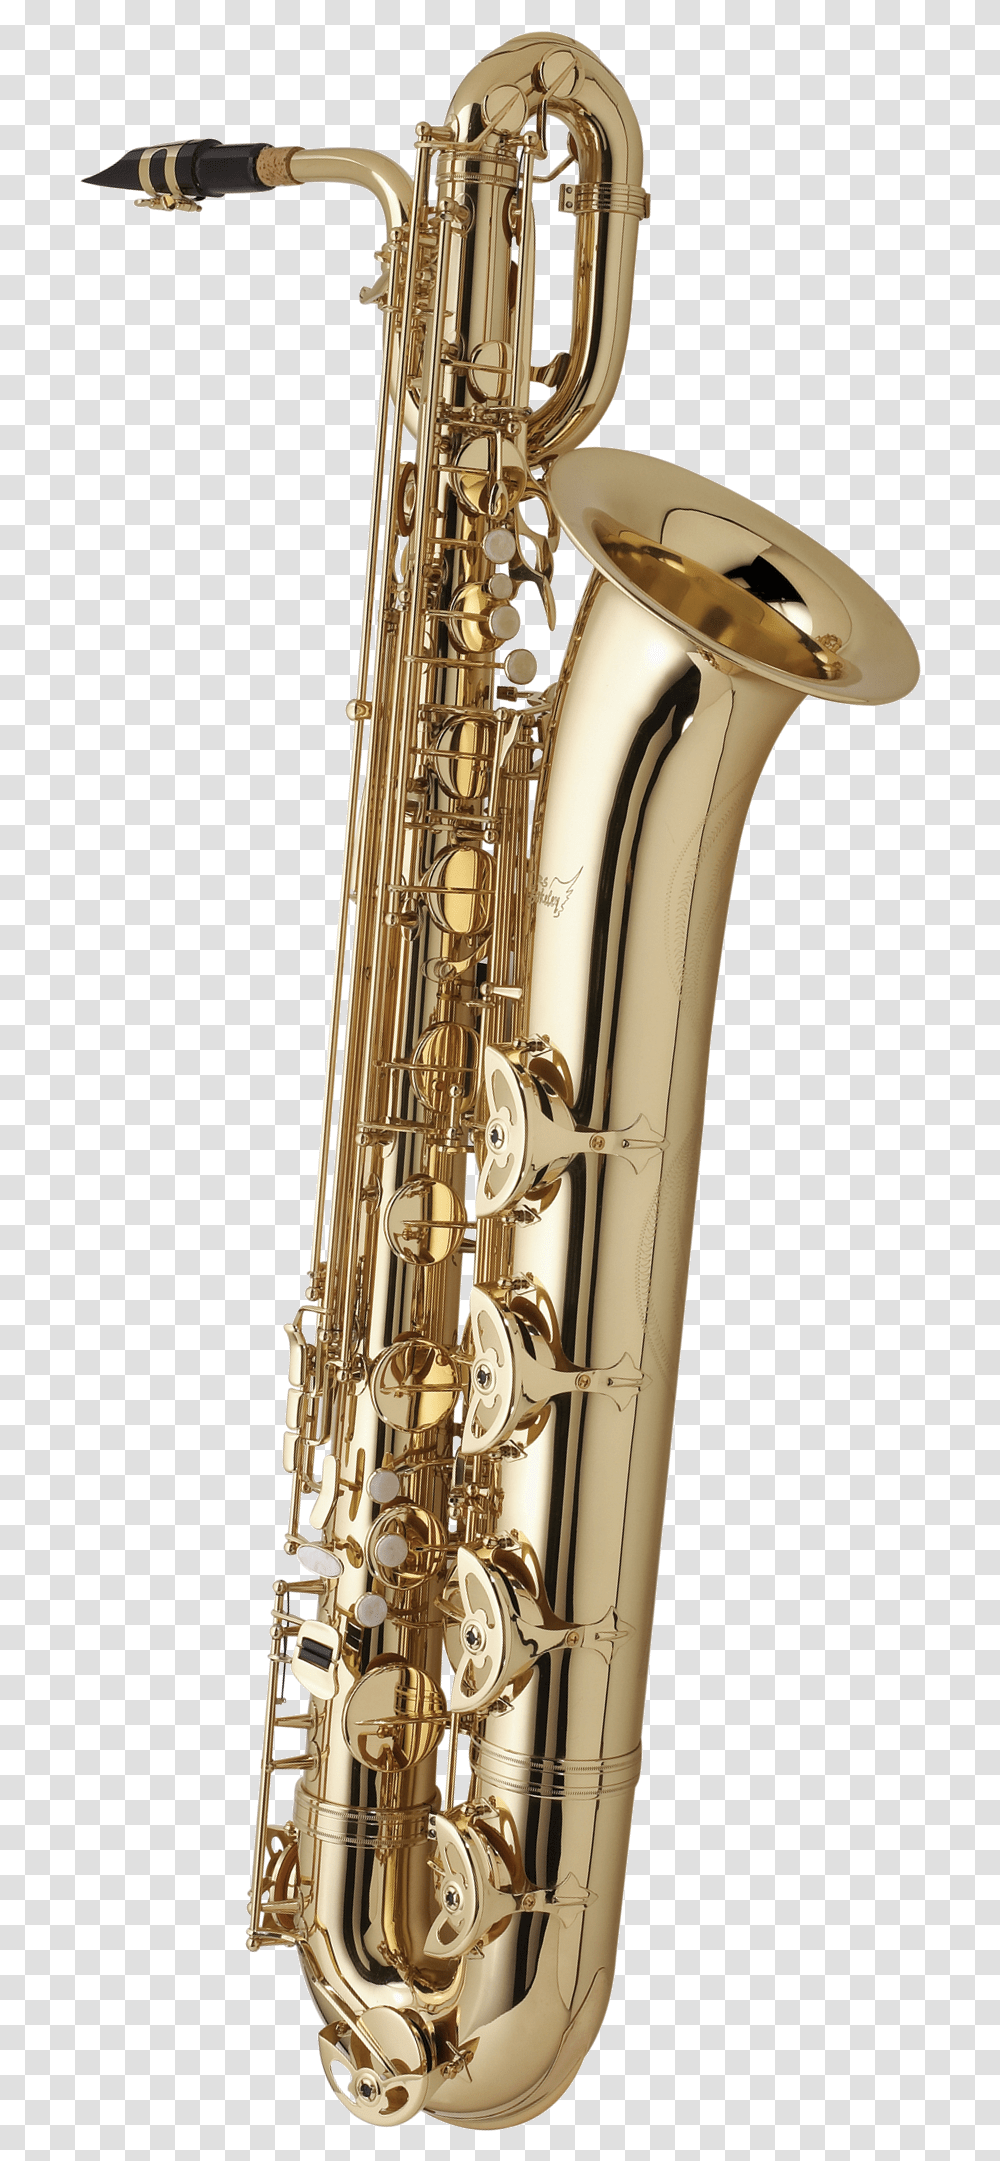 Baritone Saxophone By Rs Berkeley Baritone Sax, Leisure Activities, Musical Instrument, Shower Faucet Transparent Png